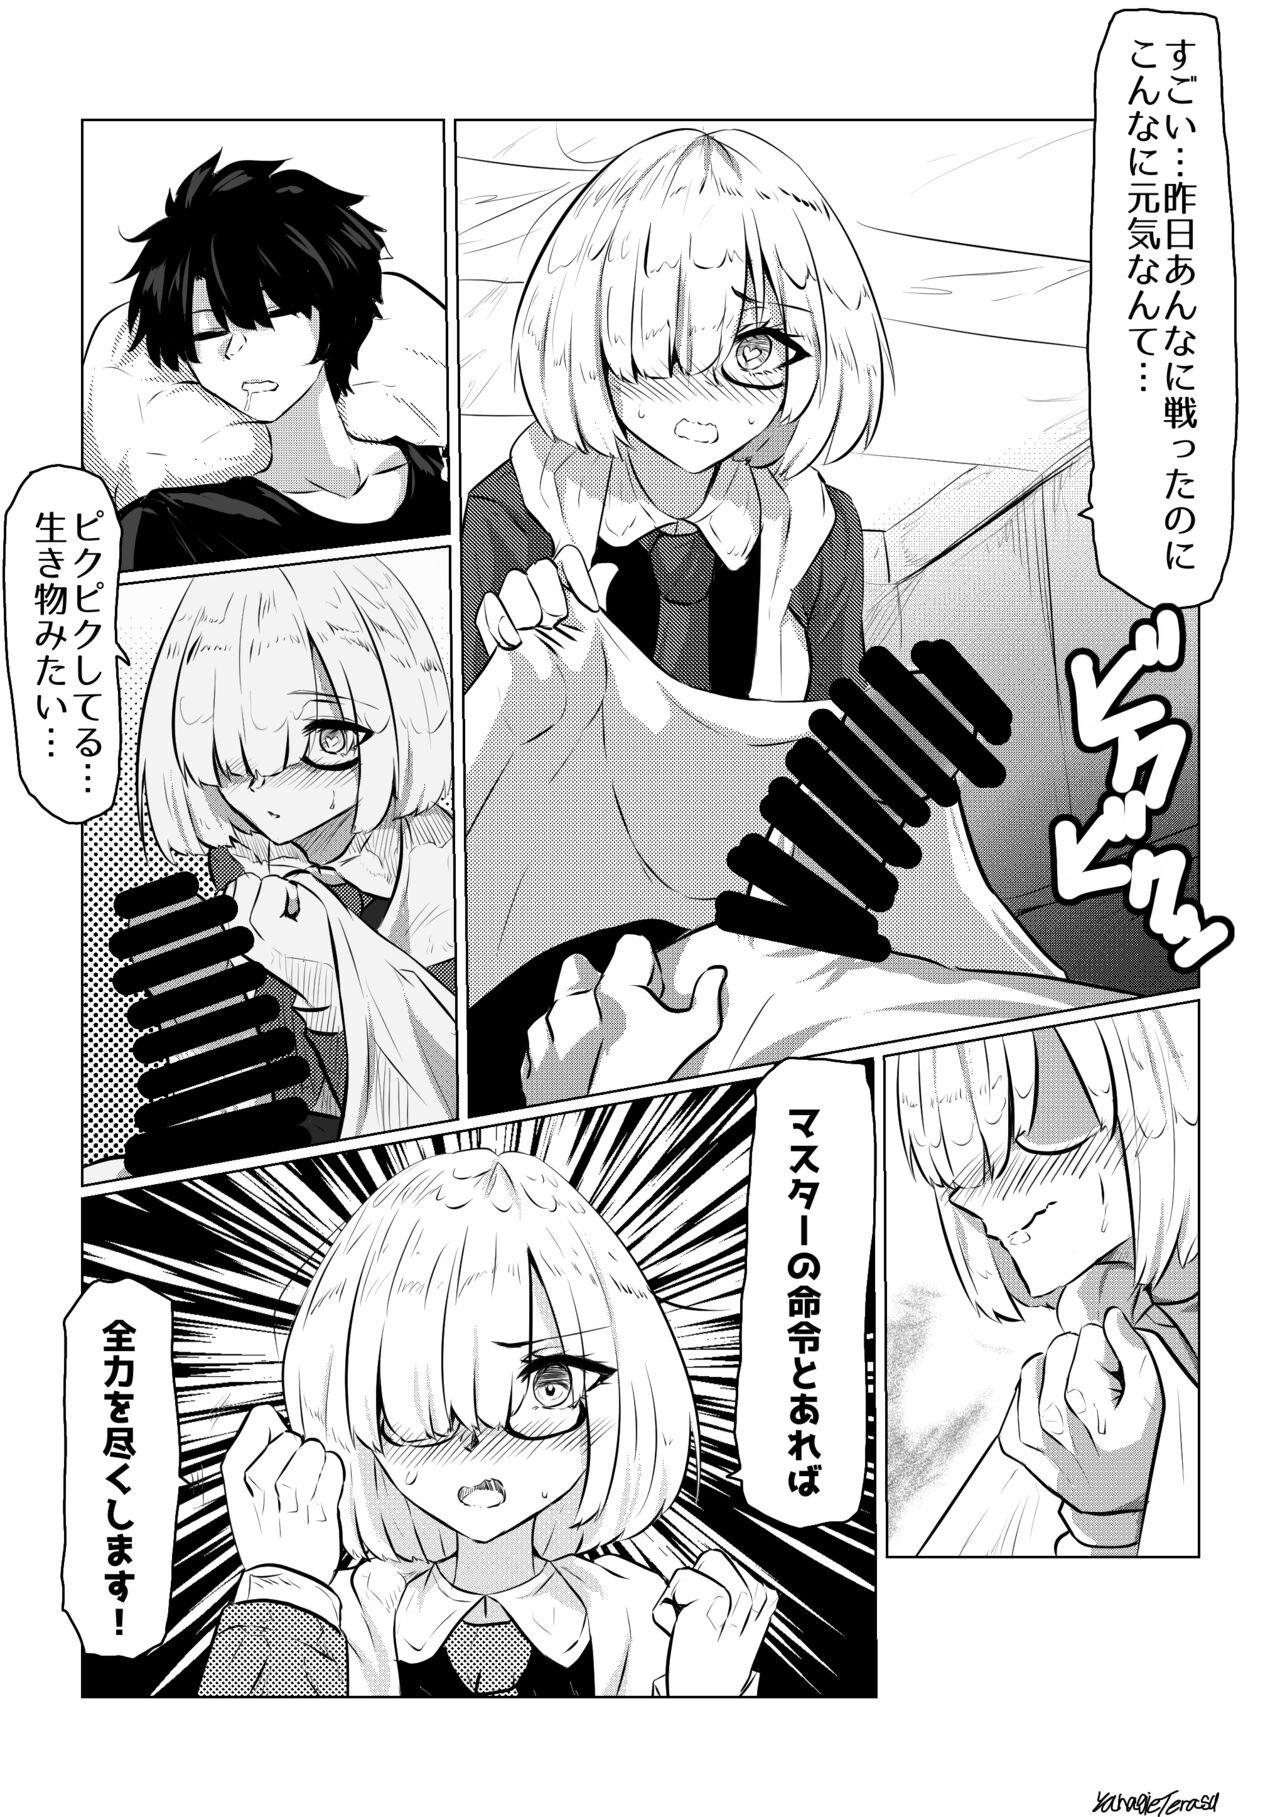 Passionate マシュの早朝ご奉仕 - Fate grand order Amatuer Porn - Page 1